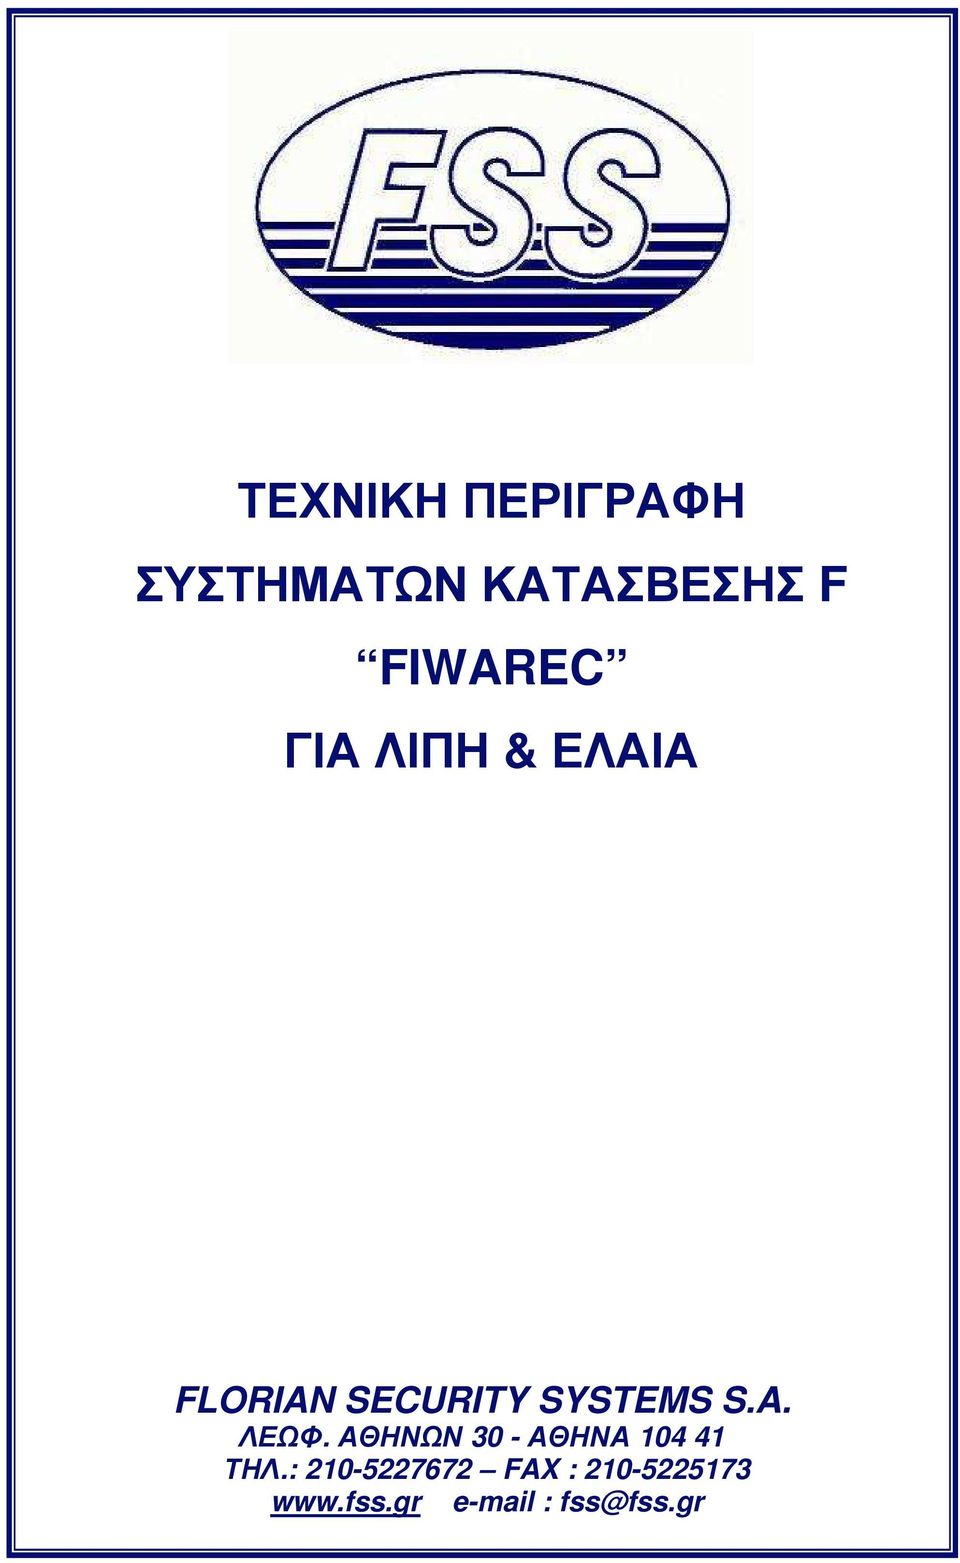 SYSTEMS S.A. ΛΕΩΦ. ΑΘΗΝΩΝ 30 - ΑΘΗΝΑ 104 41 ΤΗΛ.